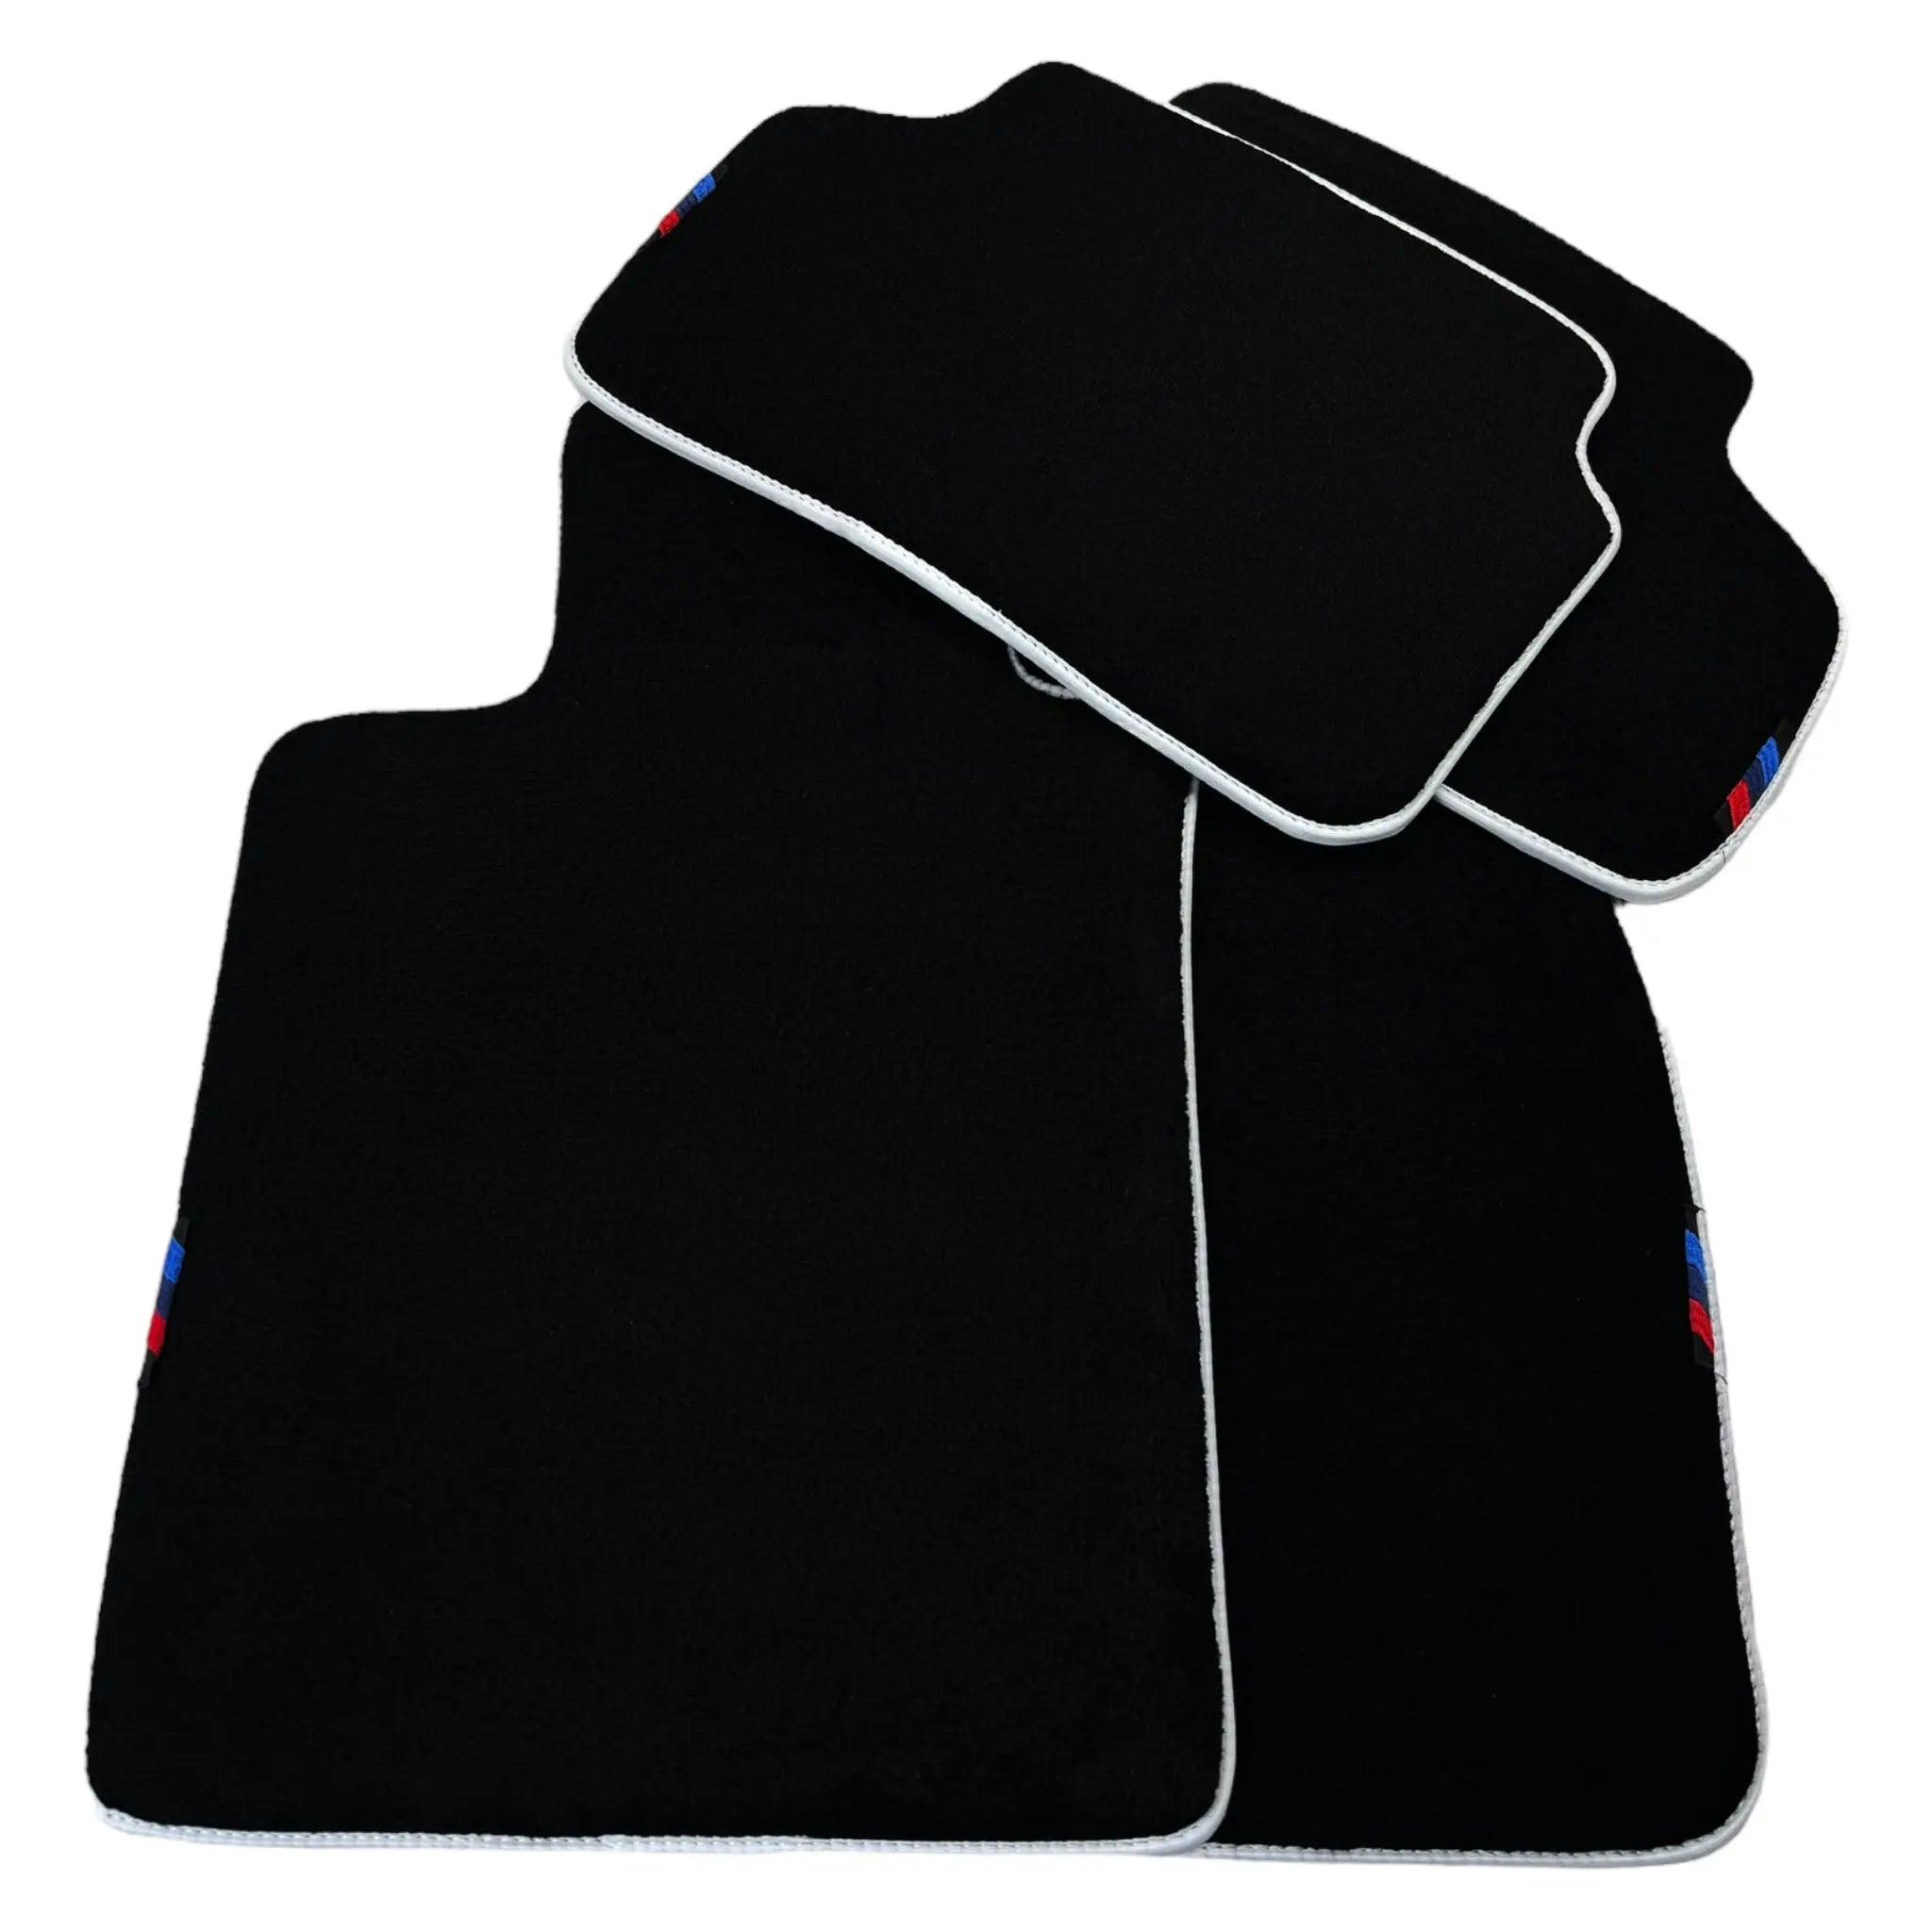 Black Floor Mats For BMW 2 Series F44 Gran Coupe | White Trim